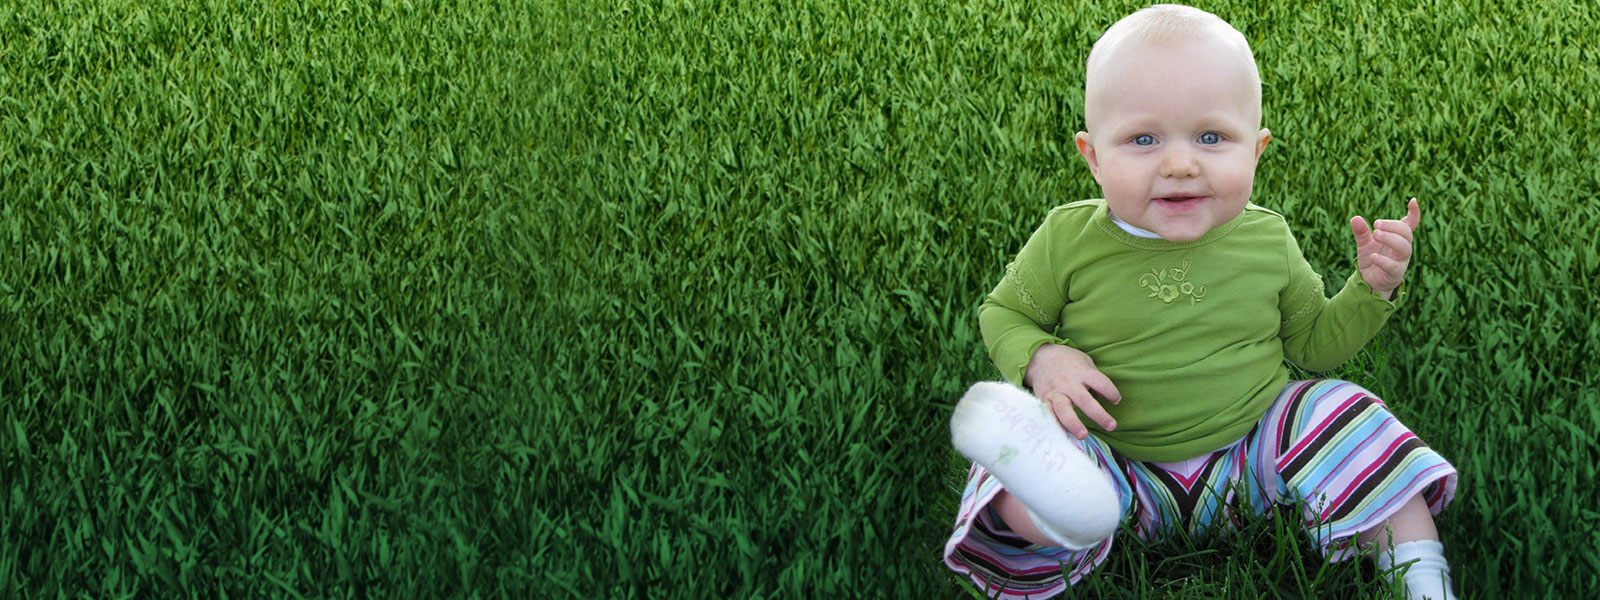 A baby sitting in a field of green grass